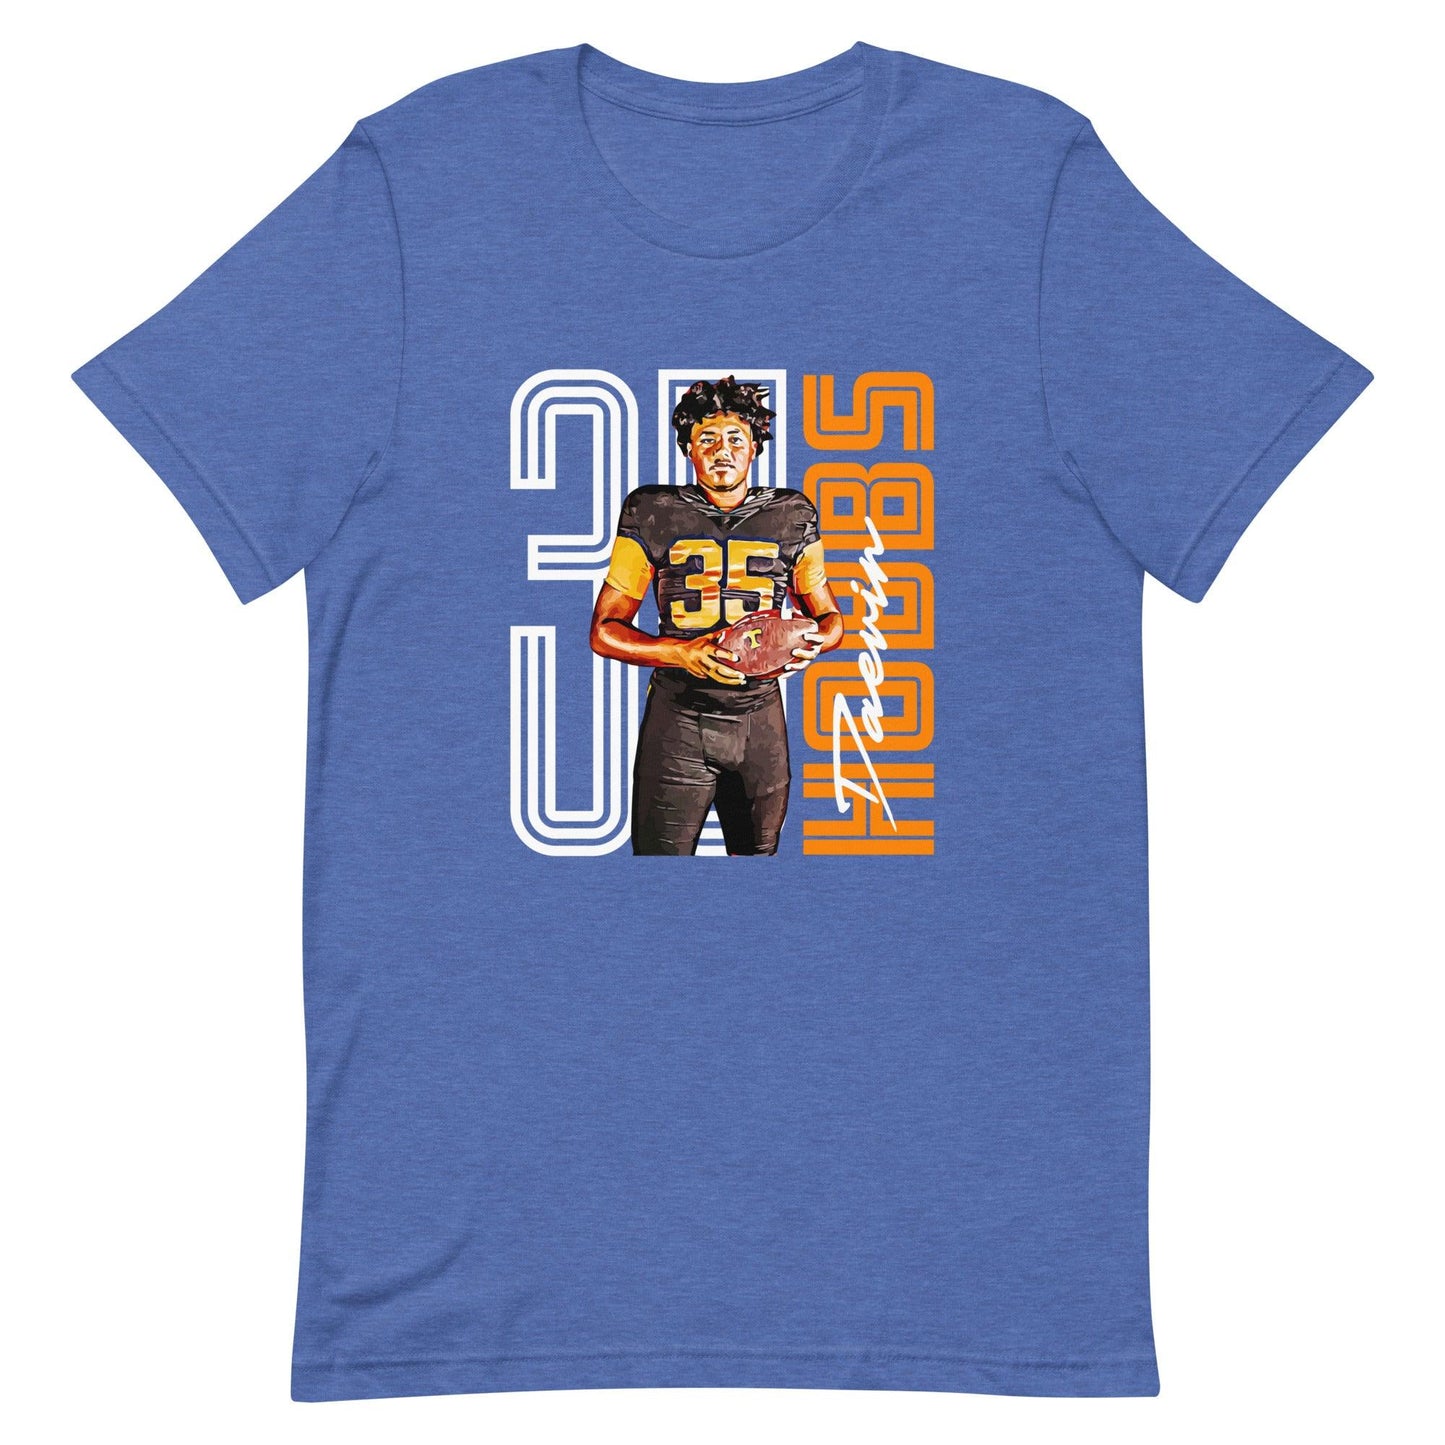 Daevin Hobbs "Gameday" t-shirt - Fan Arch